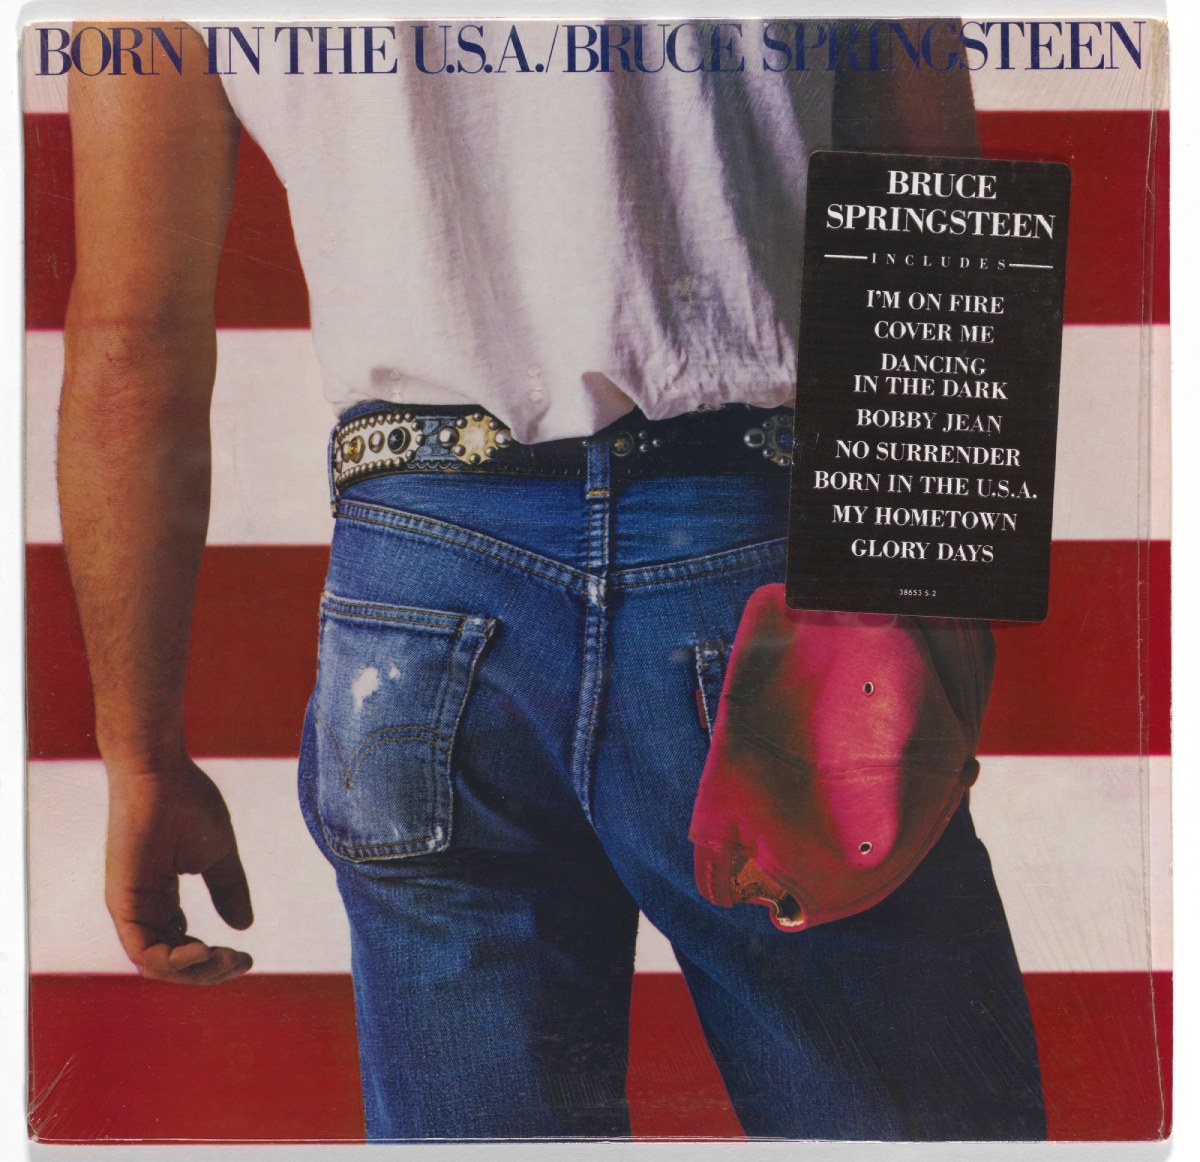 Bruce Springsteen - "Born in the USA" (1984)